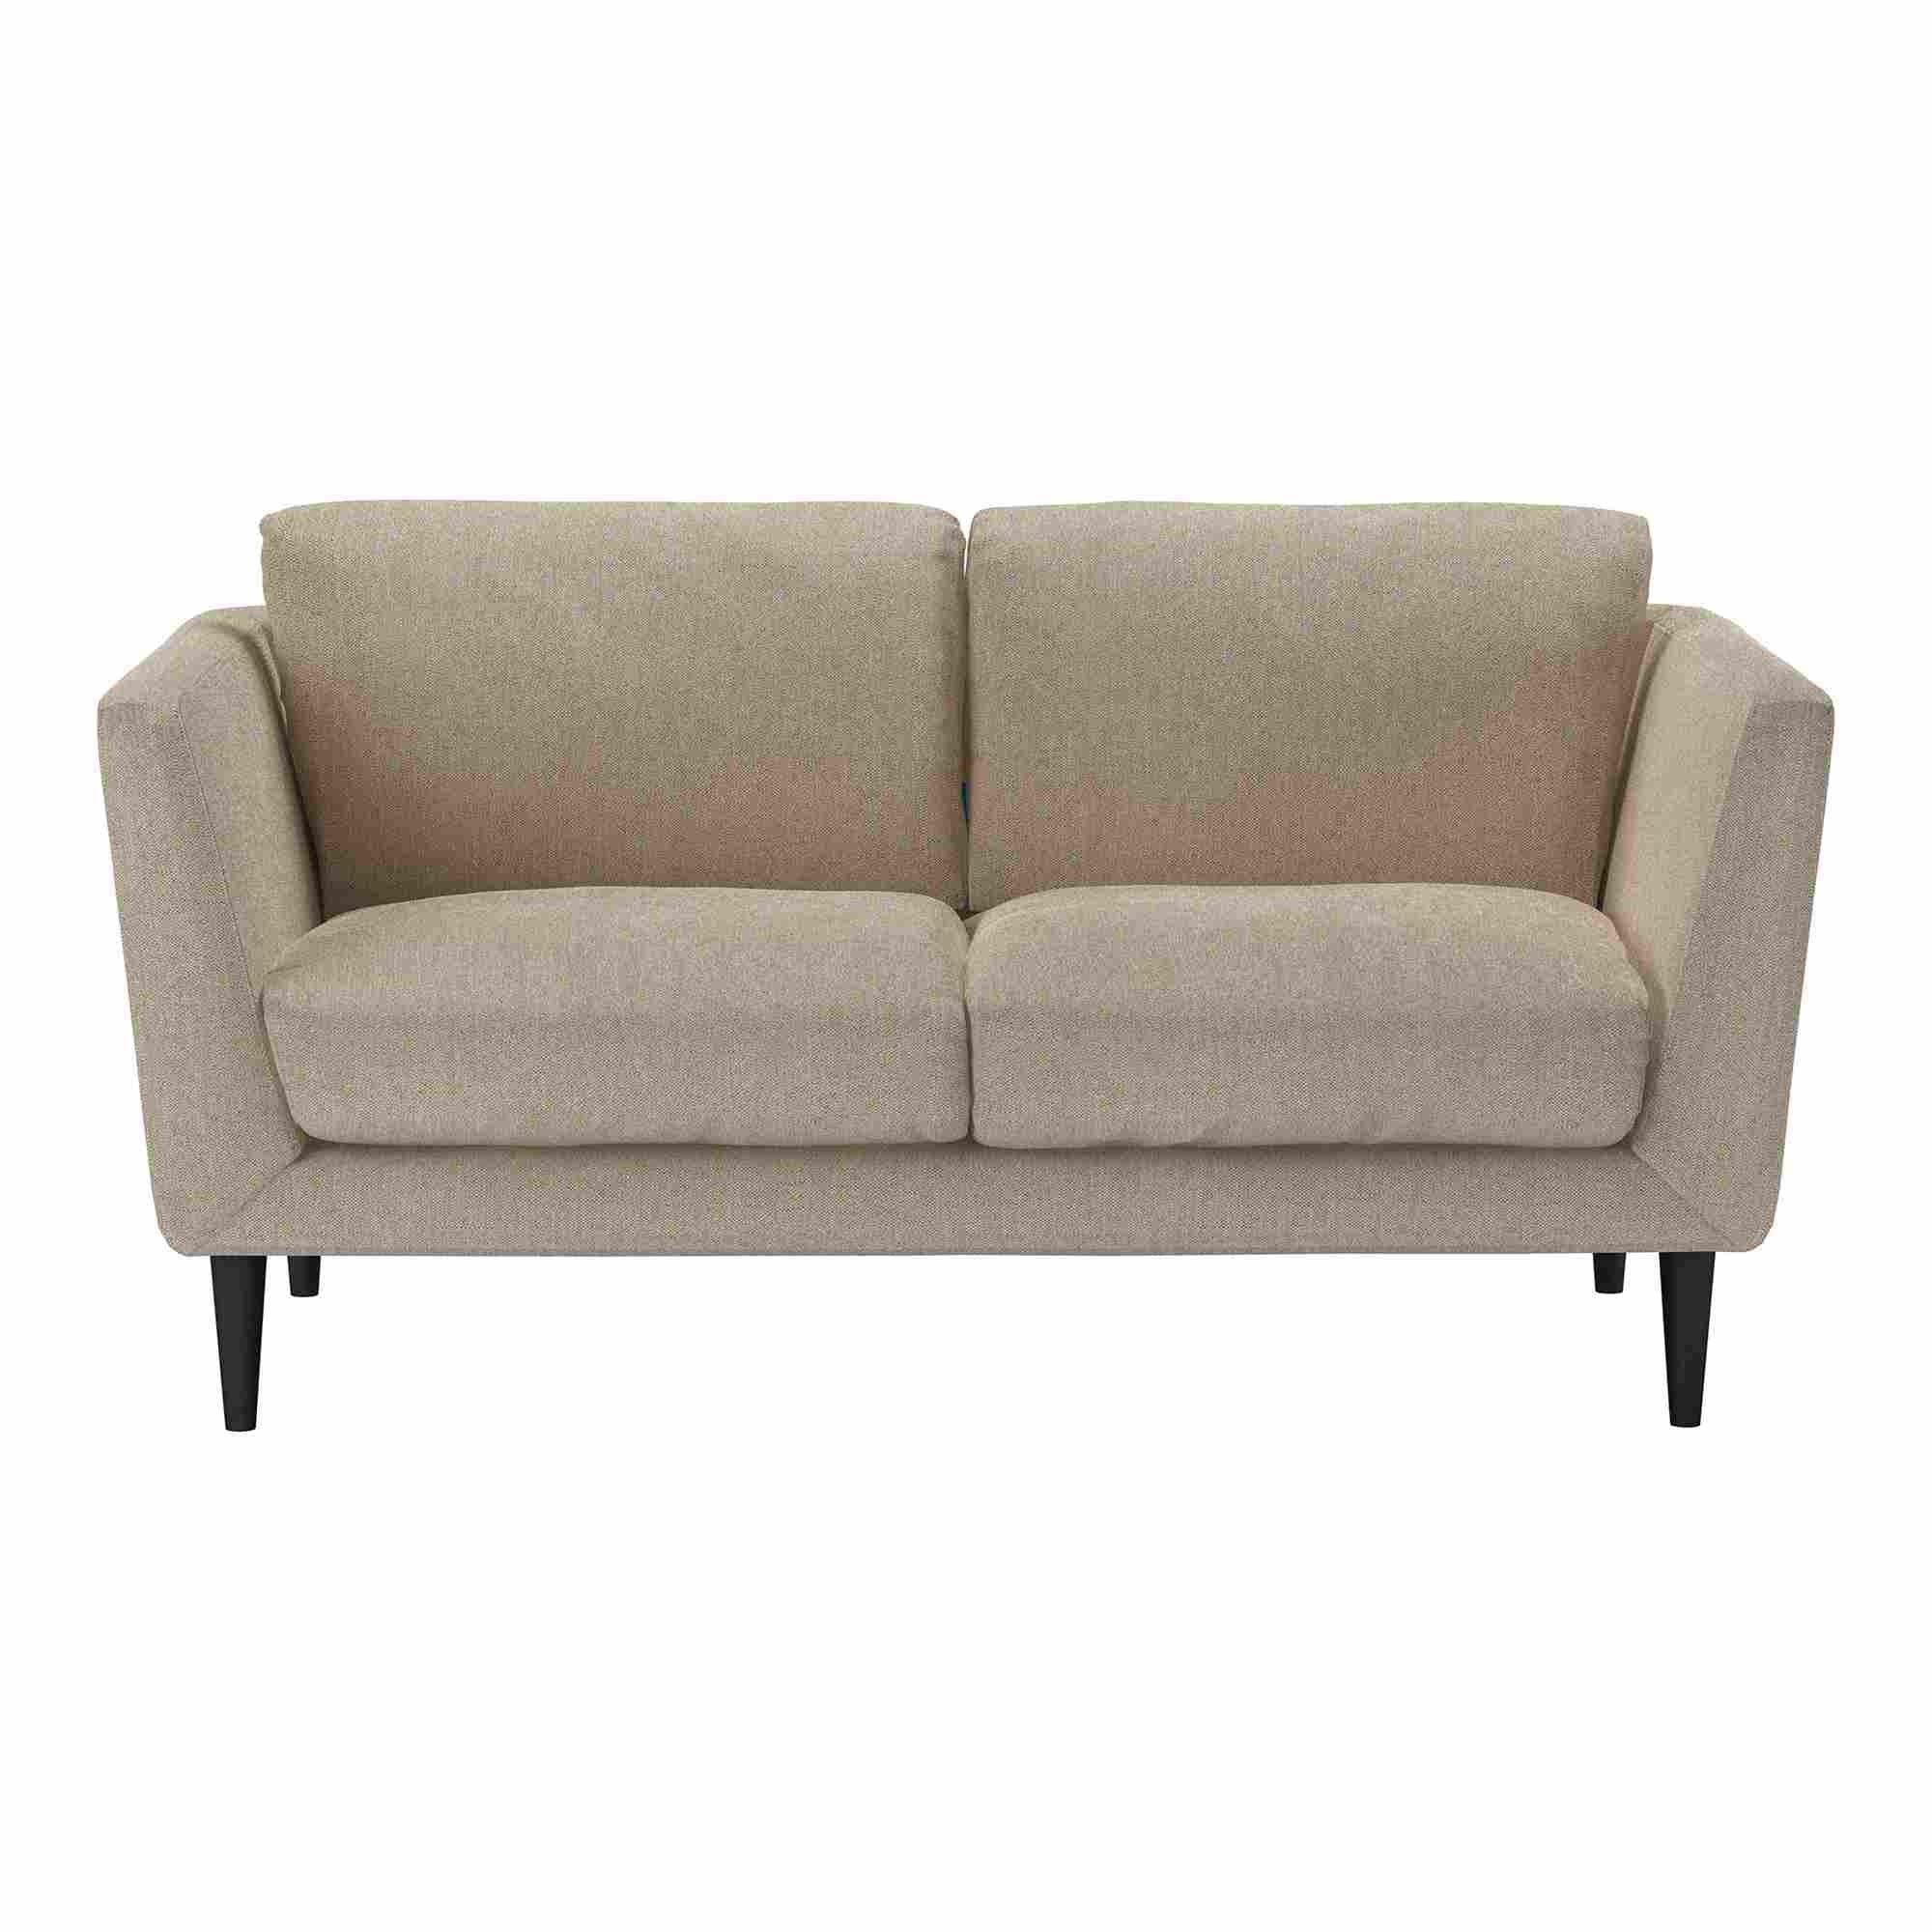 Holly Cashew Baylee Viscose Linen Sofa - 2 Seater